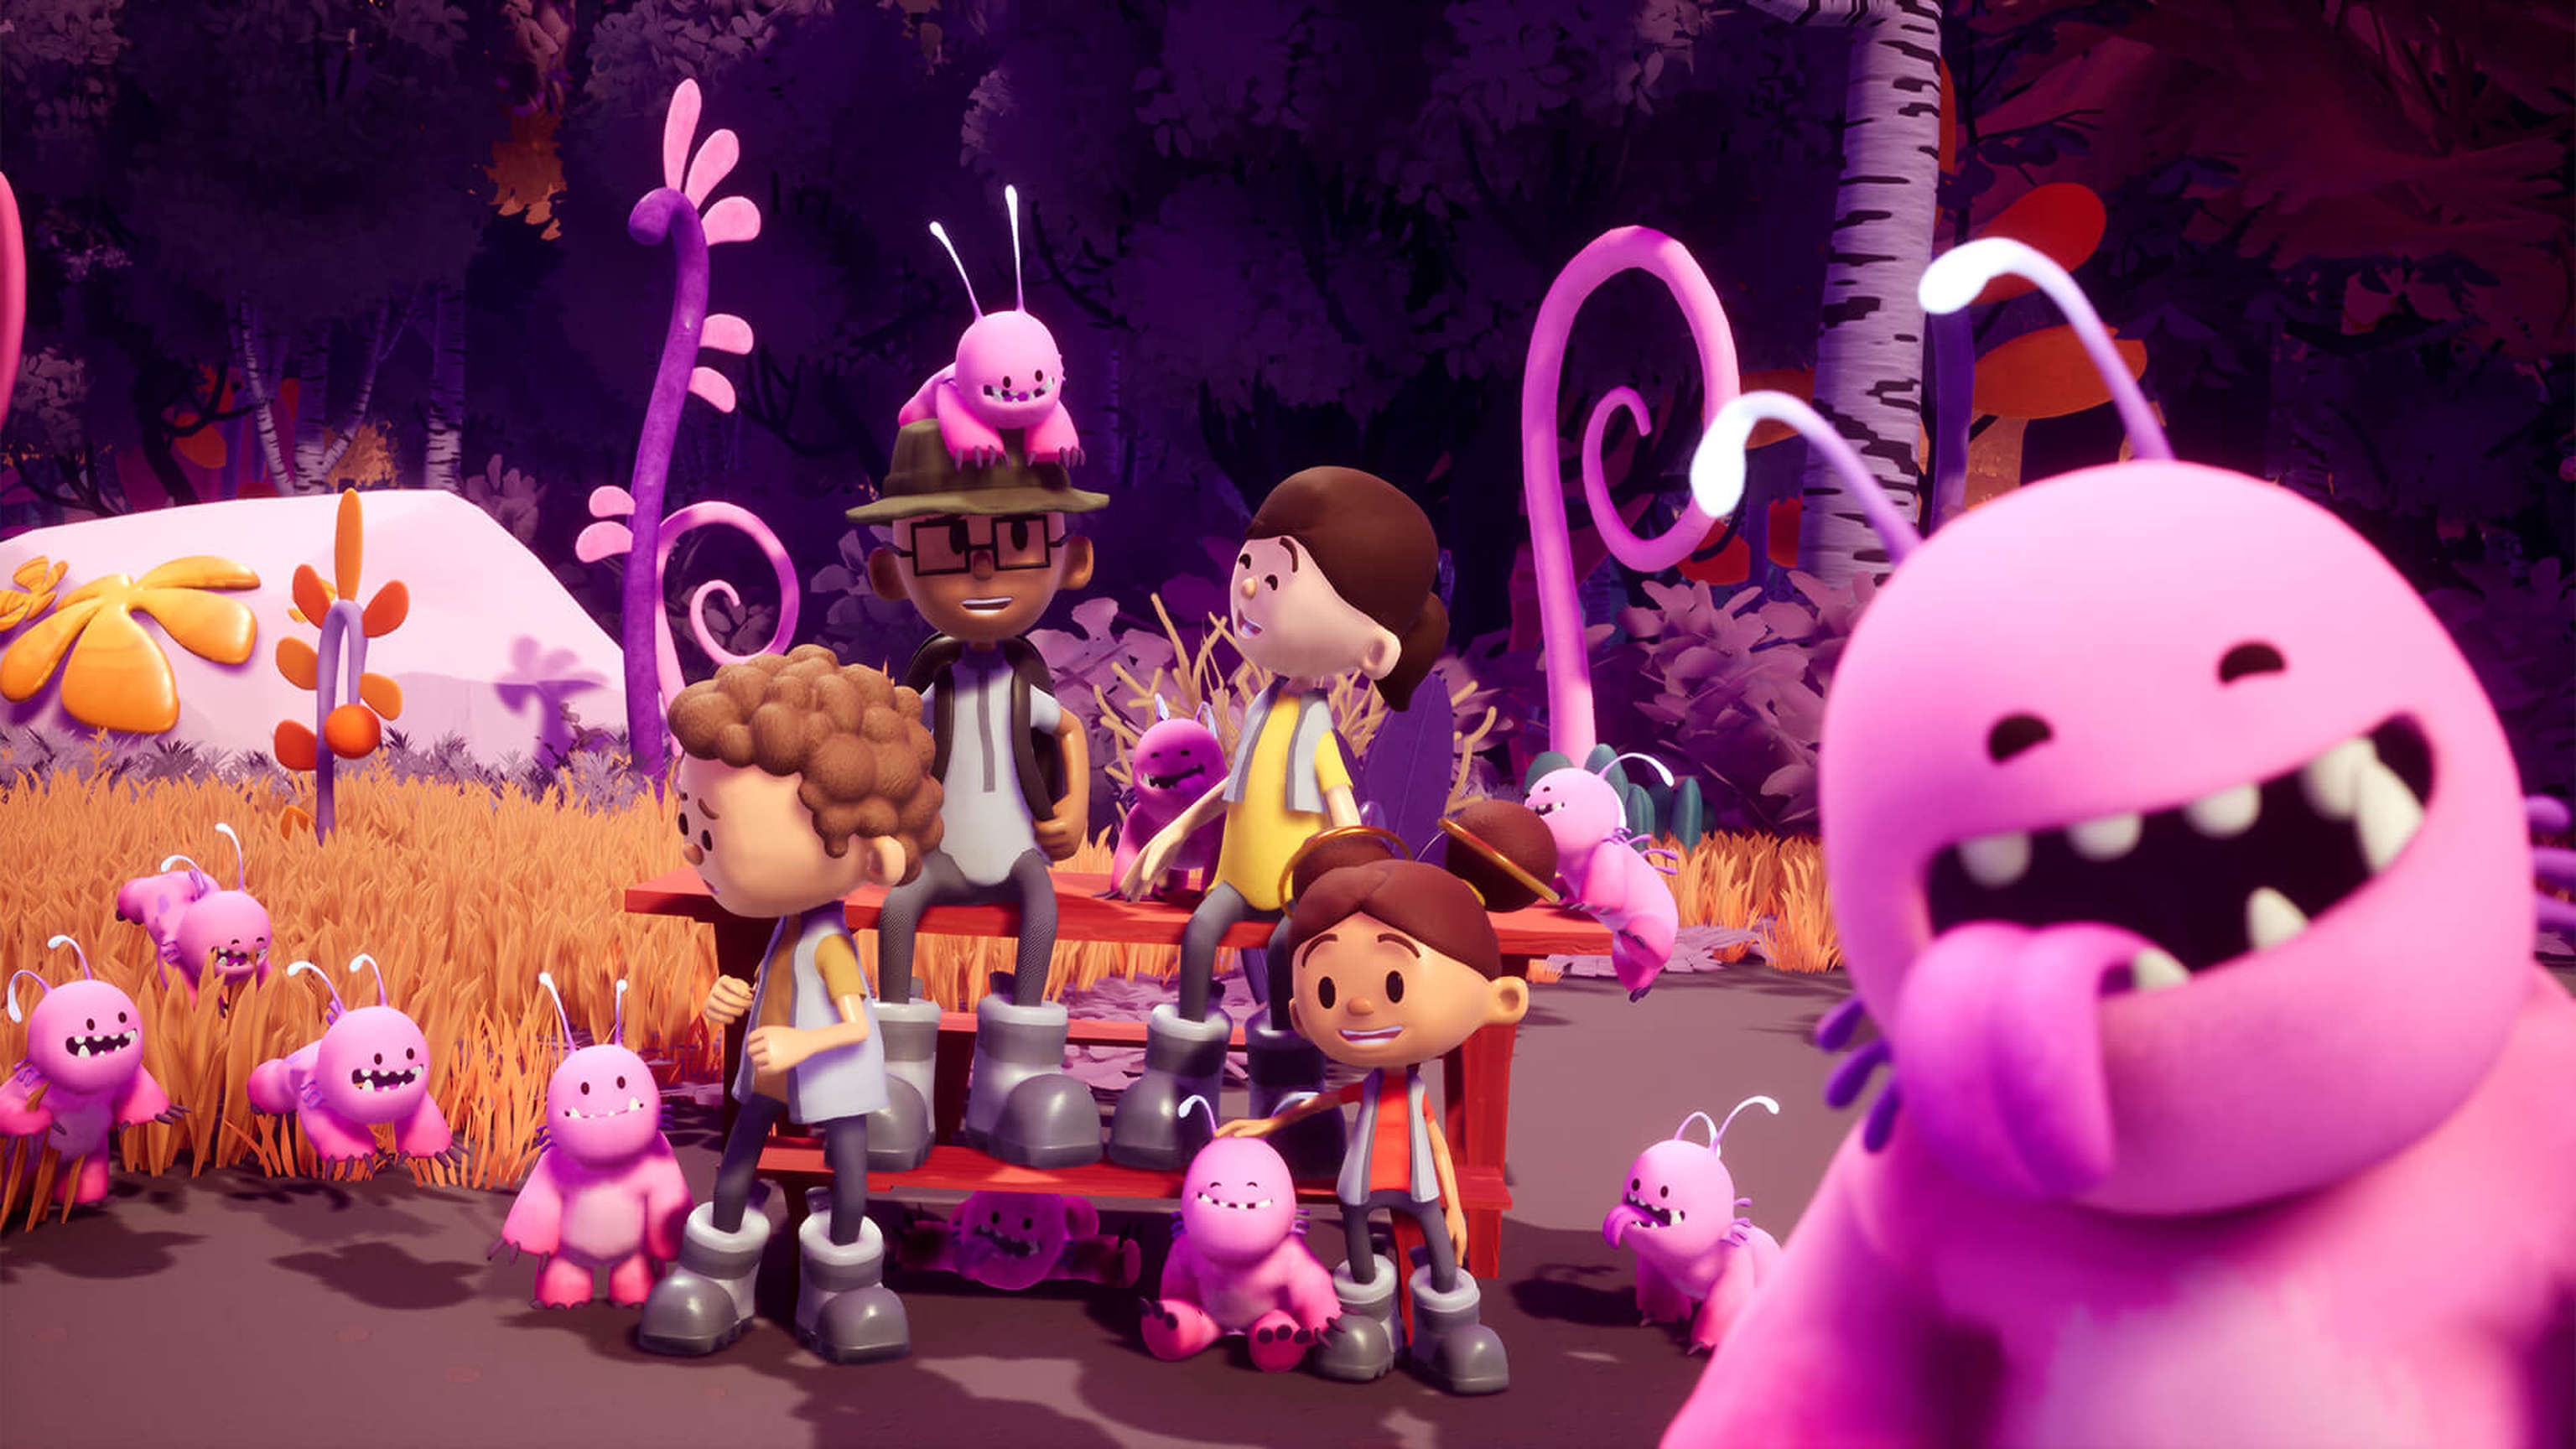 A group of animated characters surrounded by pink characters with antennae